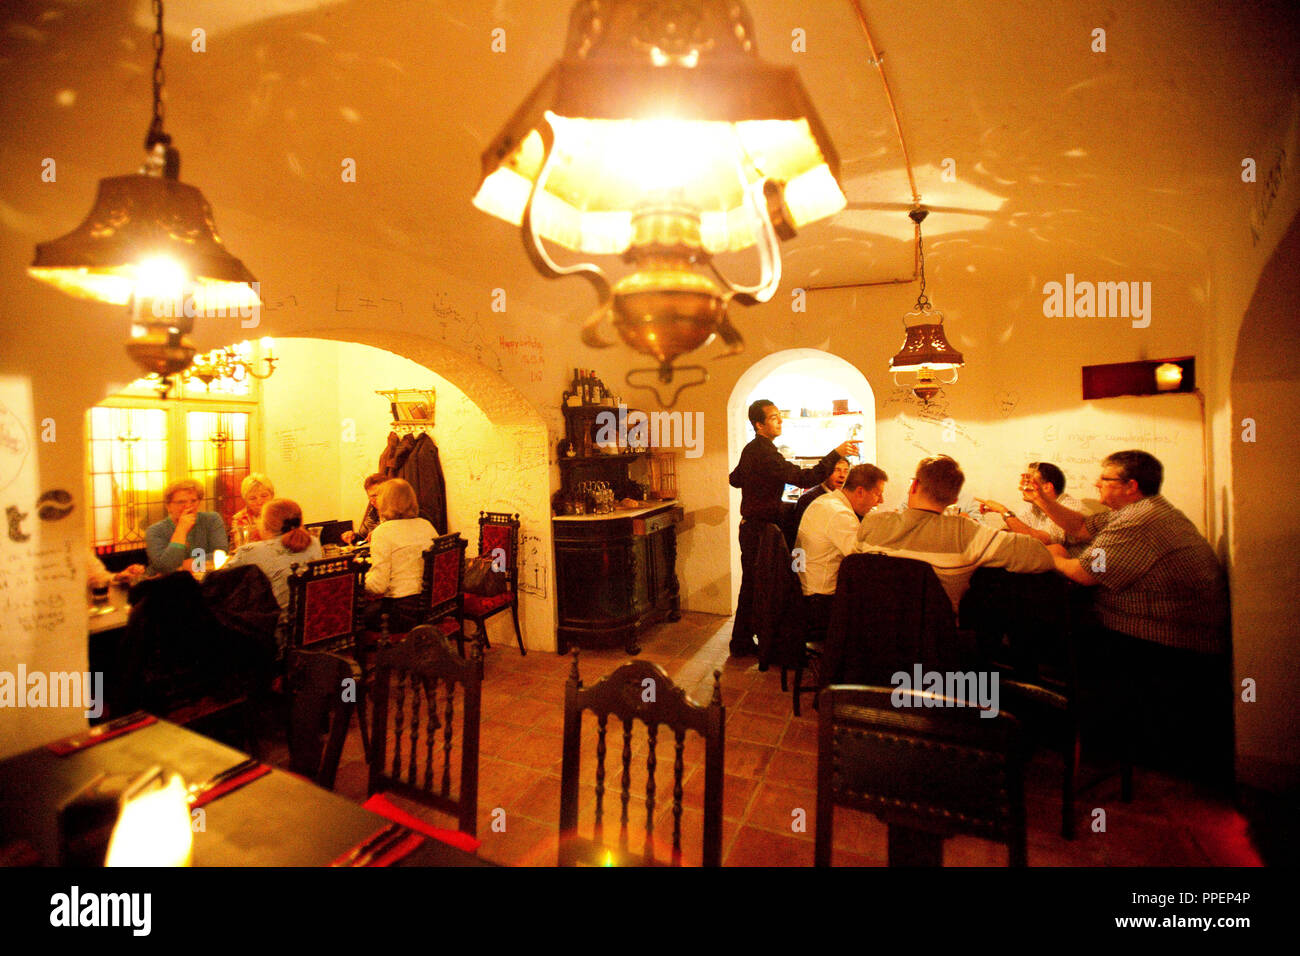 Guests in the Spanish restaurant 'Don Quijote' in the basement of a listed building in the Biedersteiner Strasse 6. Stock Photo